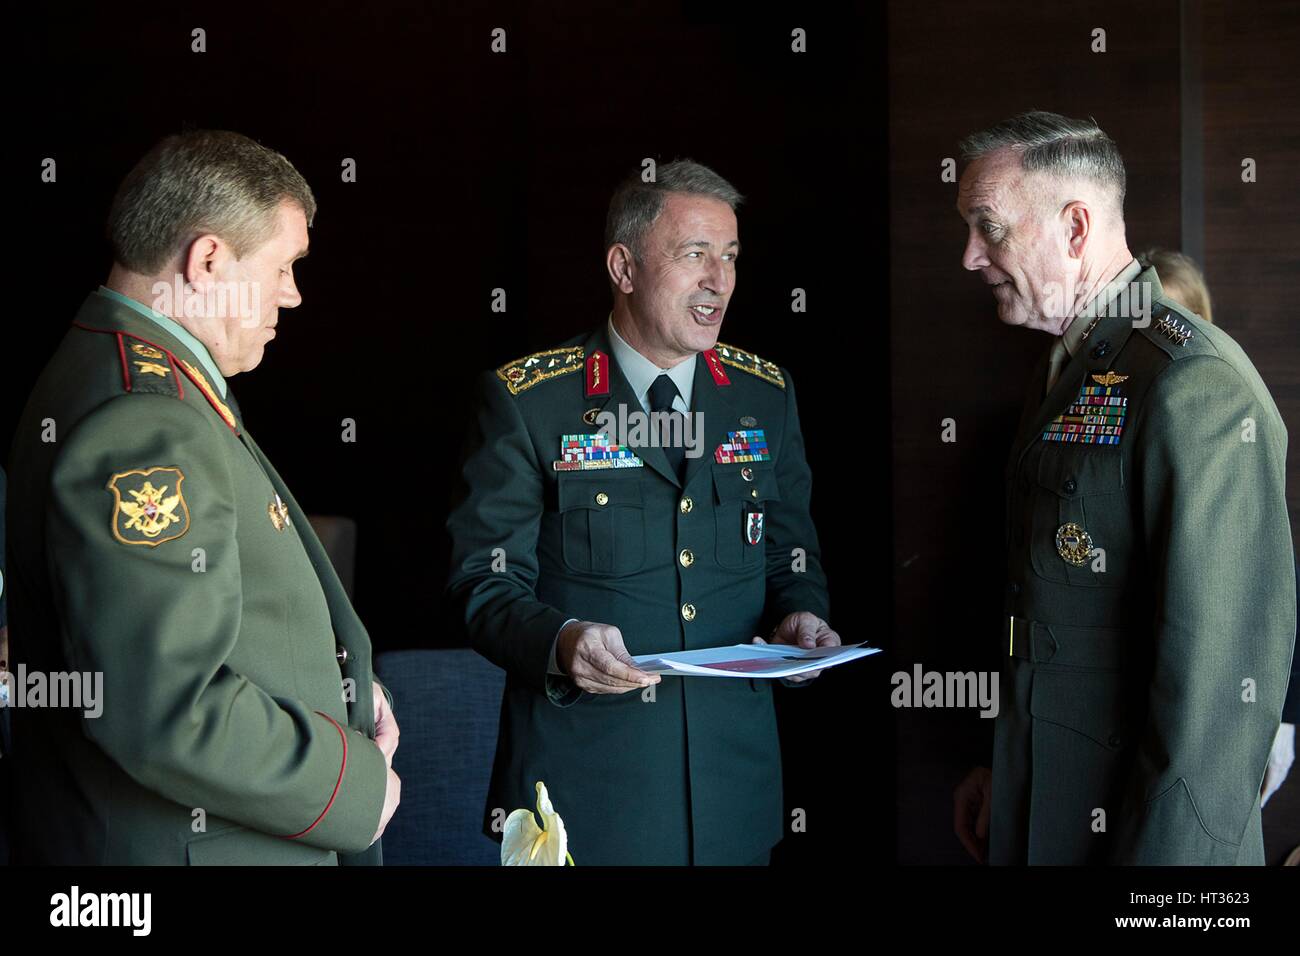 Antalya, Turkey. 7th Mar, 2017. U.S. Joint Chiefs Chairman Gen. Joseph Dunford, right, with Turkish Gen. Hulusi Akar and Russian Gen. Valery Gerasimov, left, during meetings March 7, 2017 in Antalya, Turkey. The three chiefs of defense are meeting to discuss operations in Syria. Credit: Planetpix/Alamy Live News Stock Photo